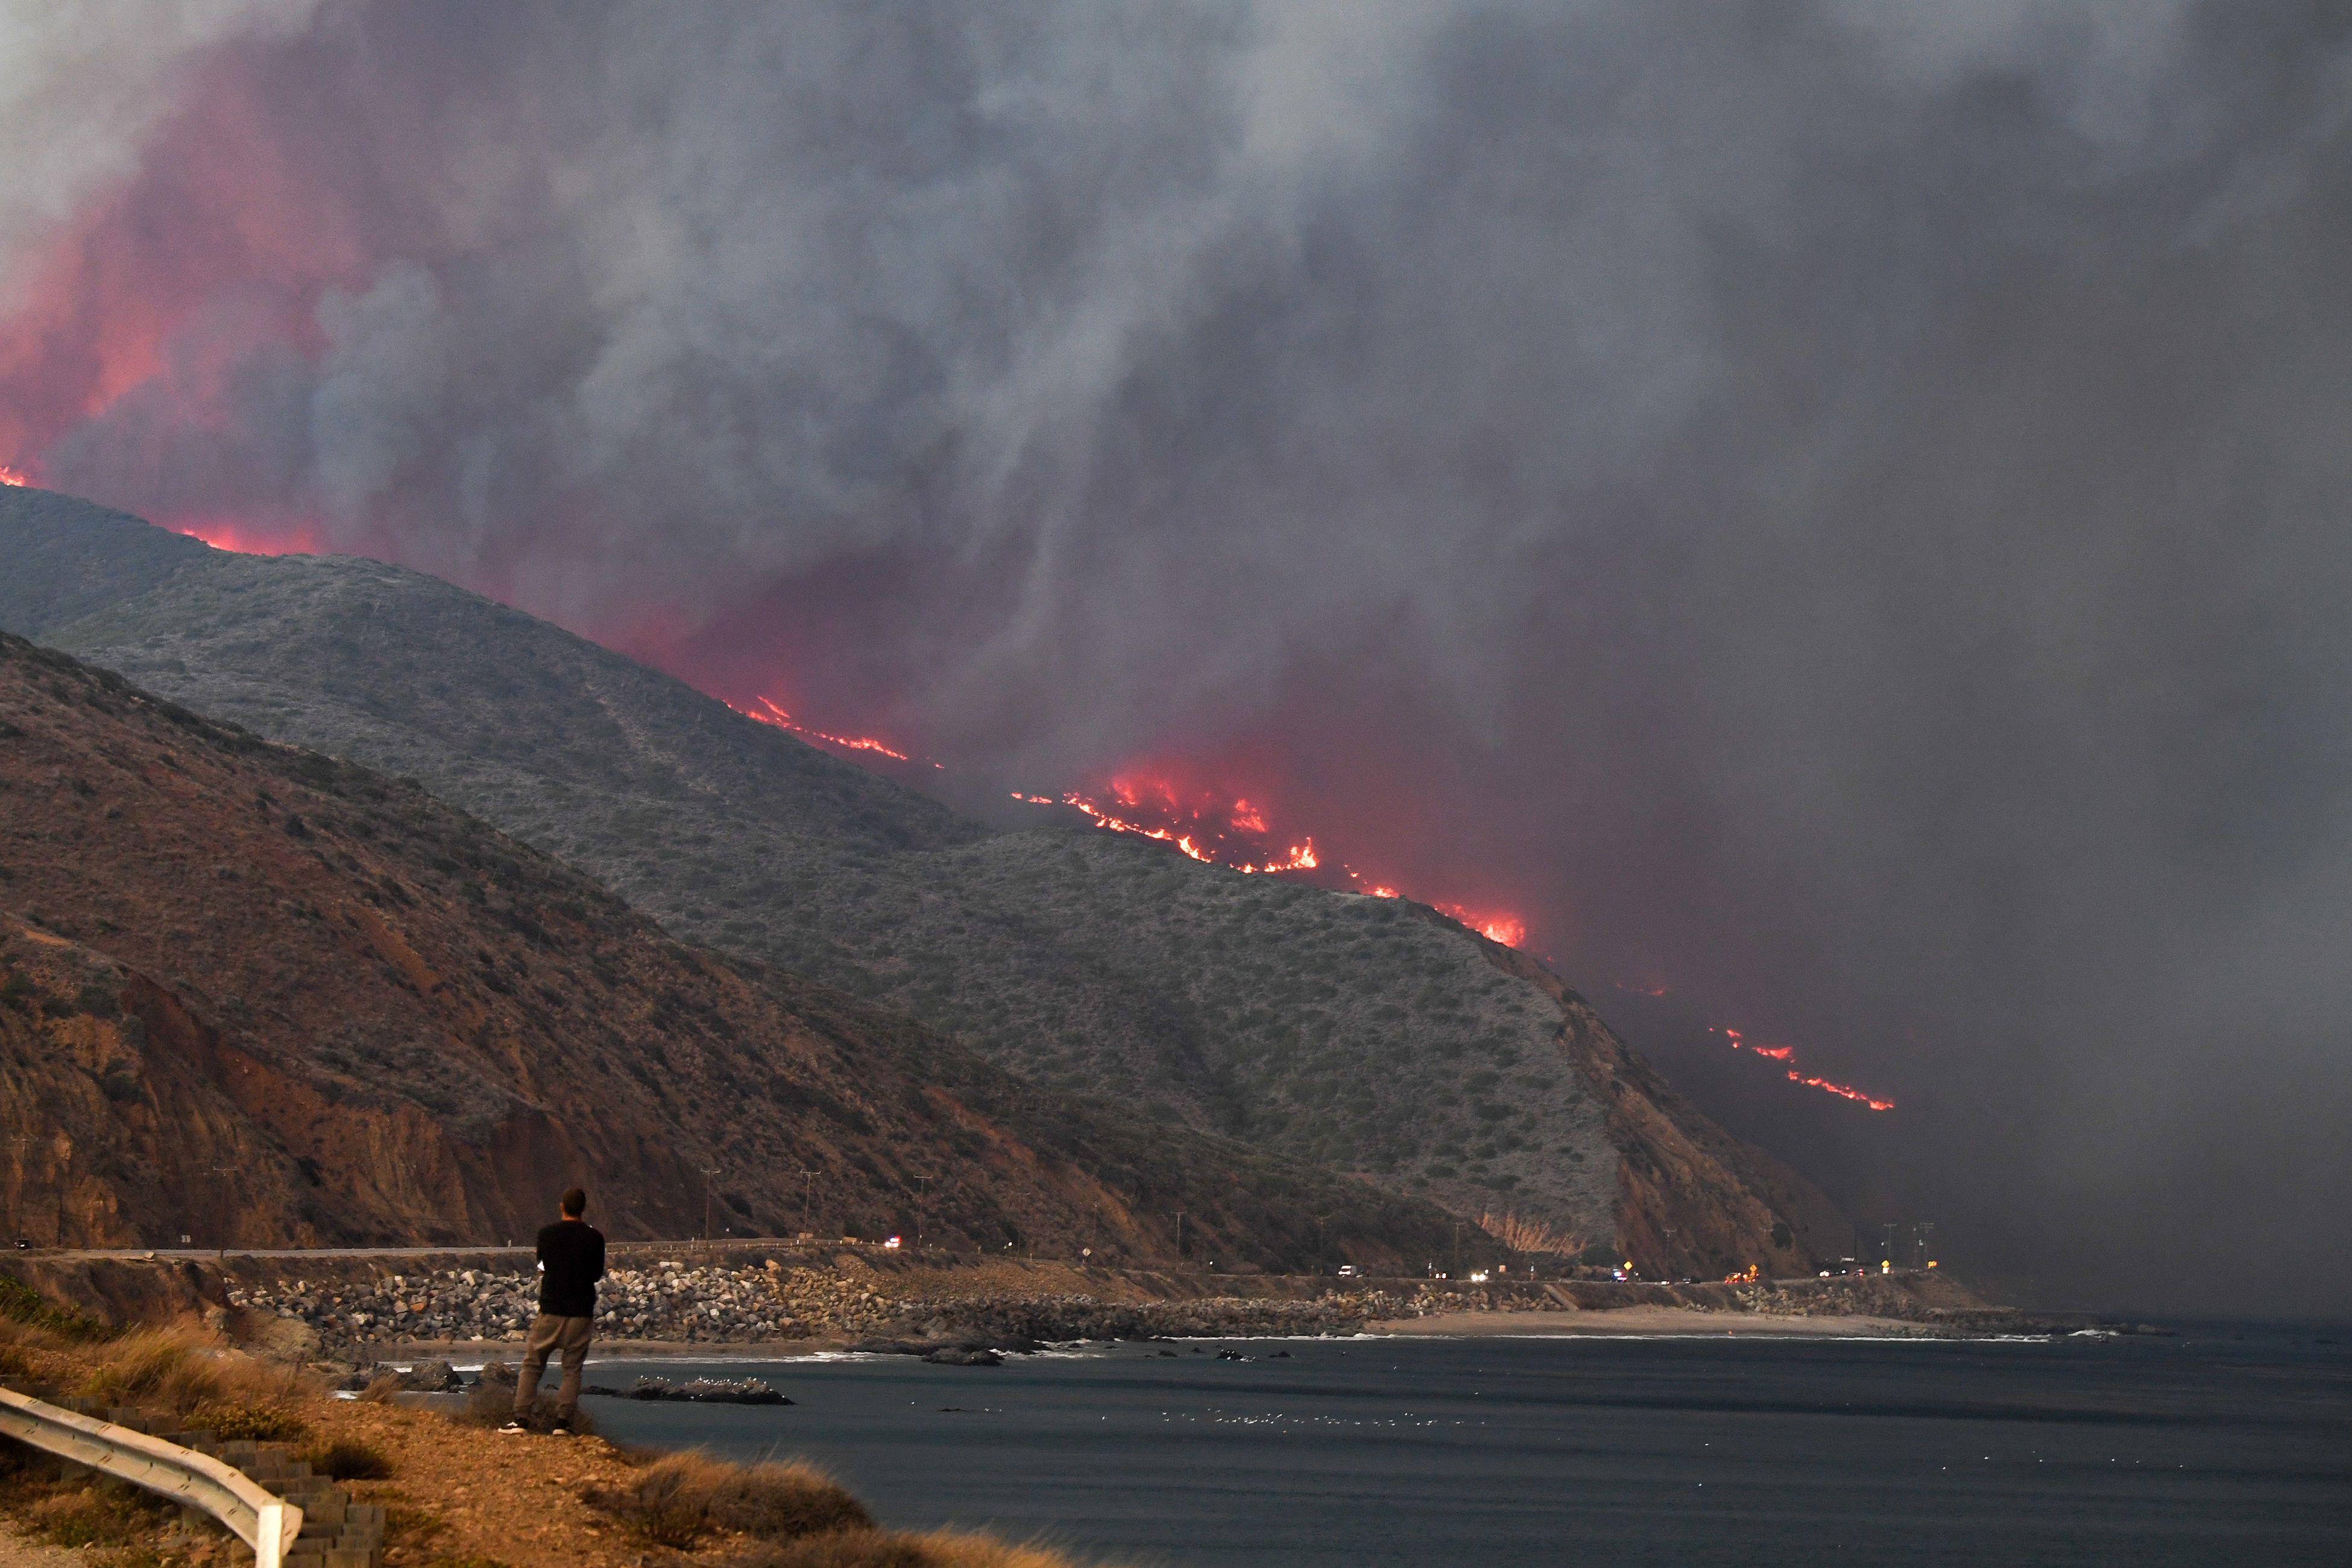 A photo of a man standing on the beach, looking back at nearby hillsides on fire.